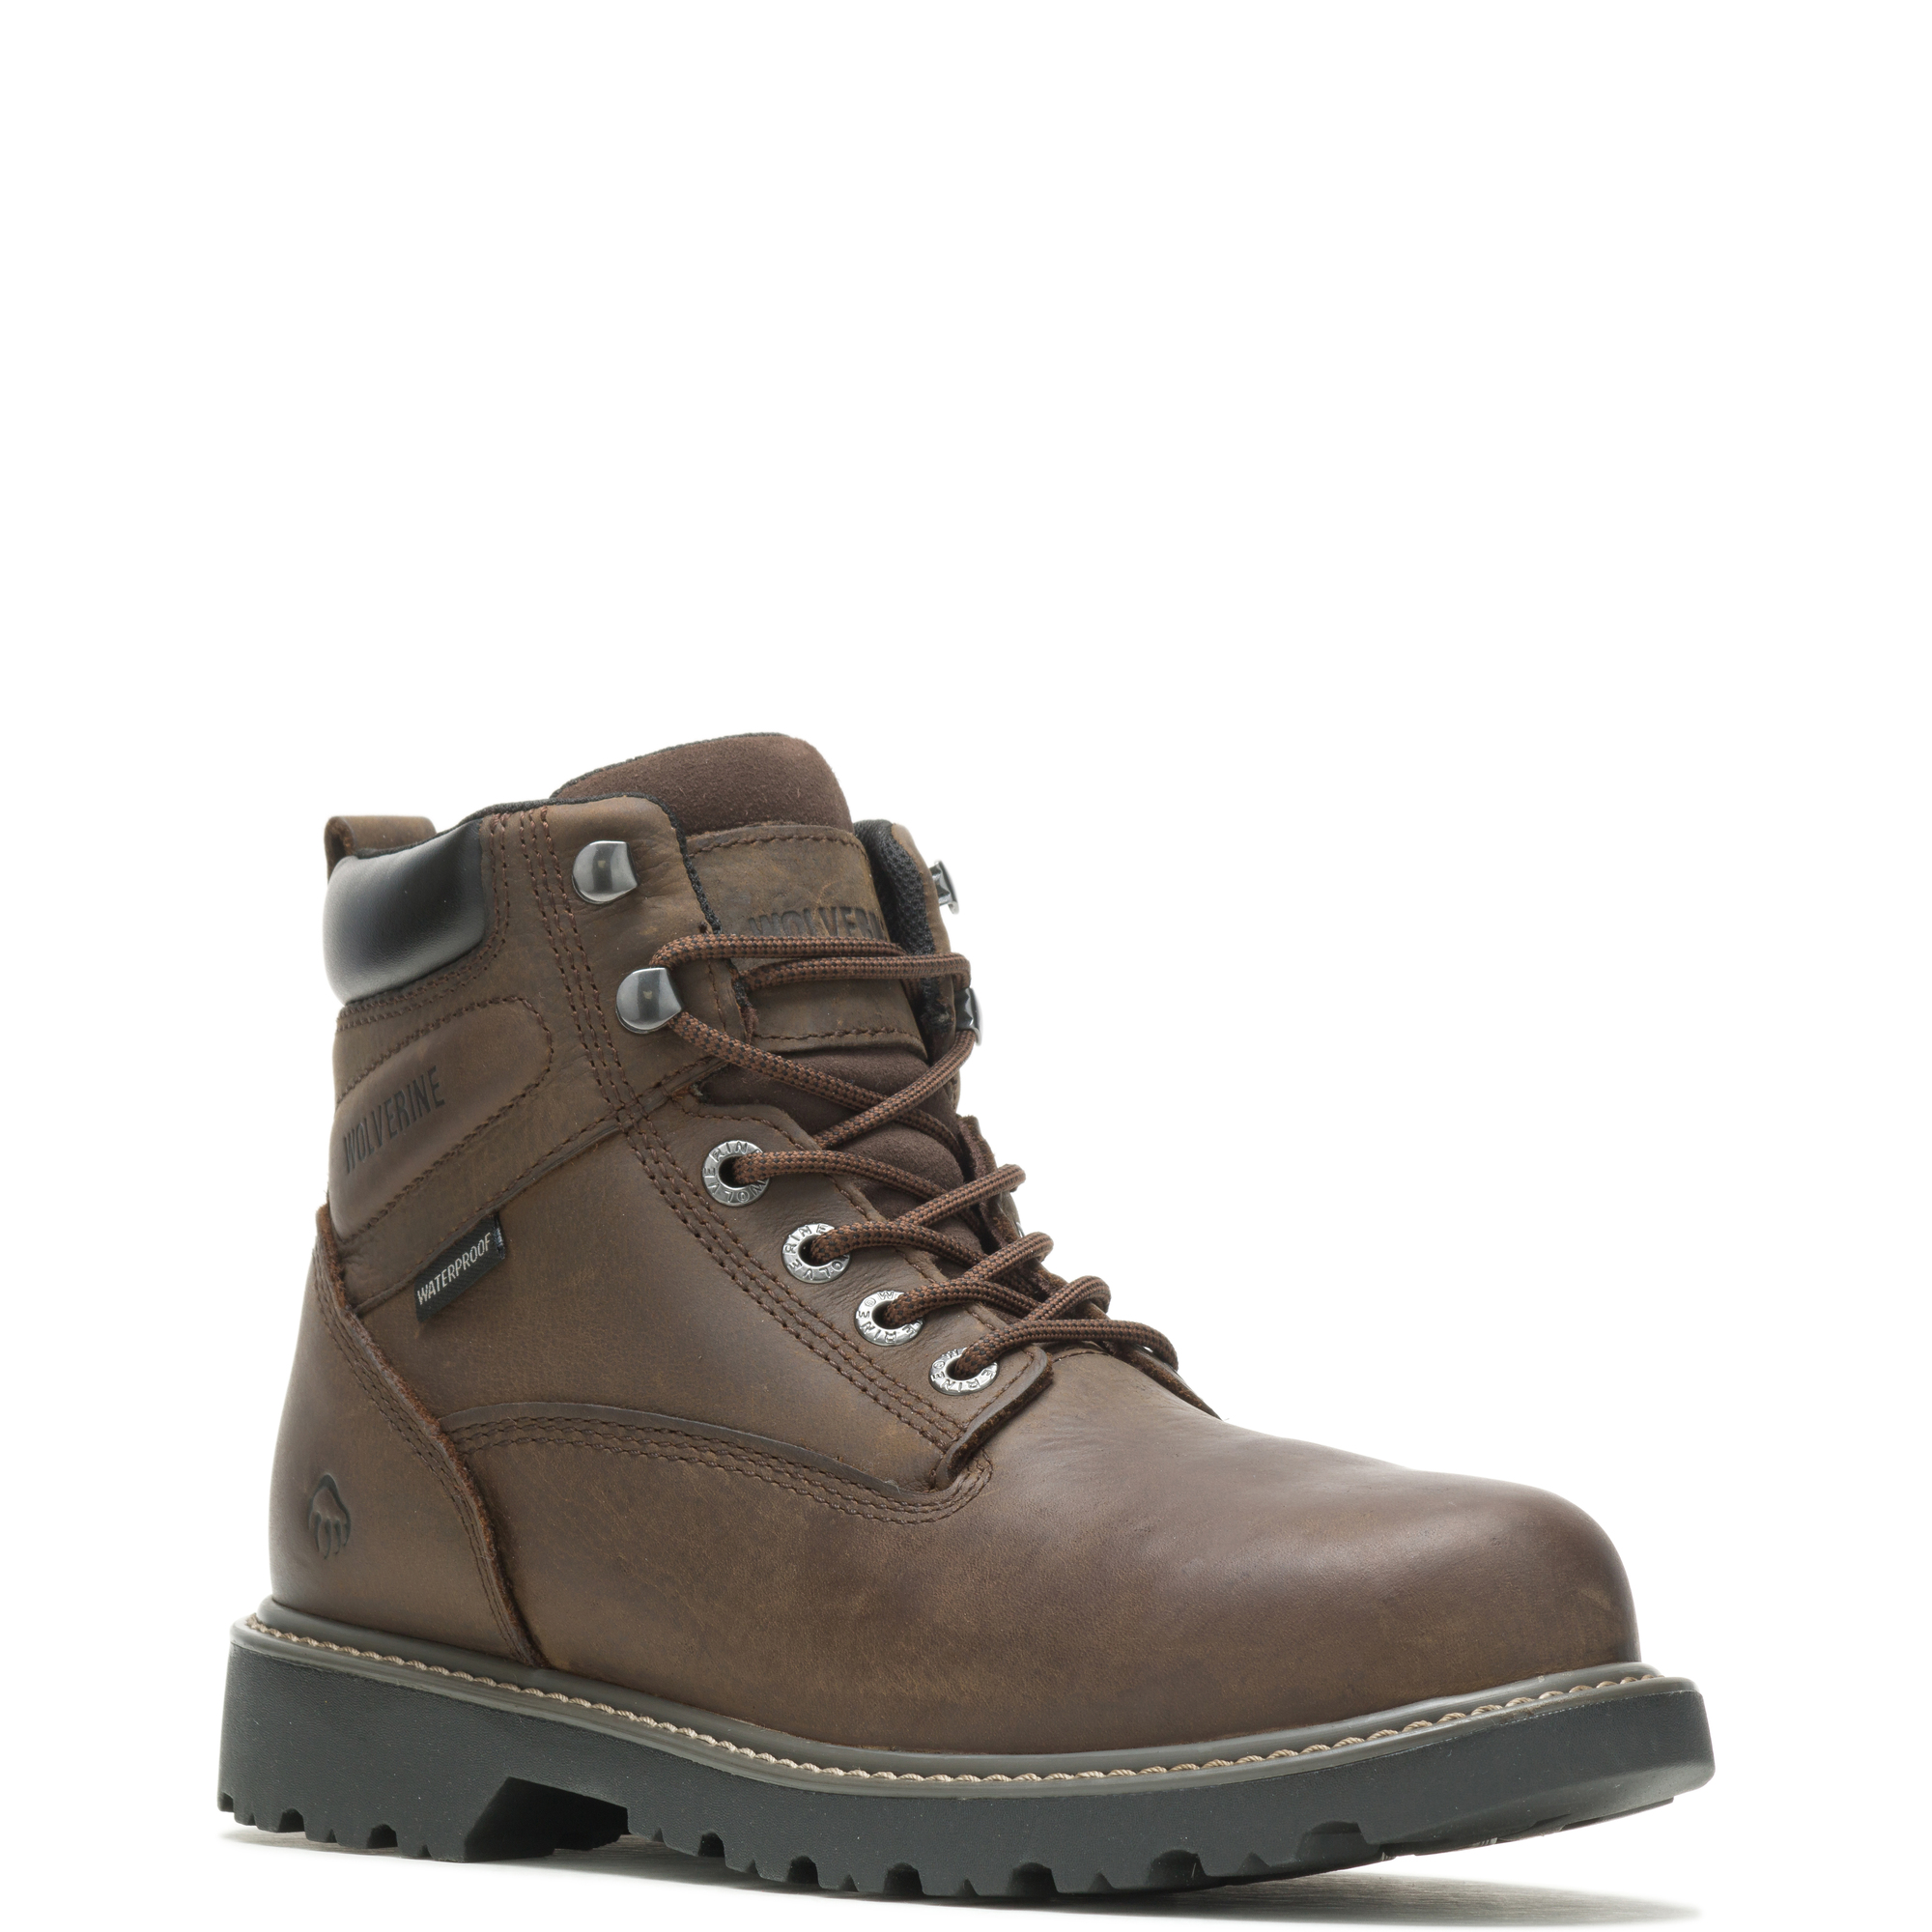 Wolverine, Soft Toe, 6in., W10,646 | Northern Tool